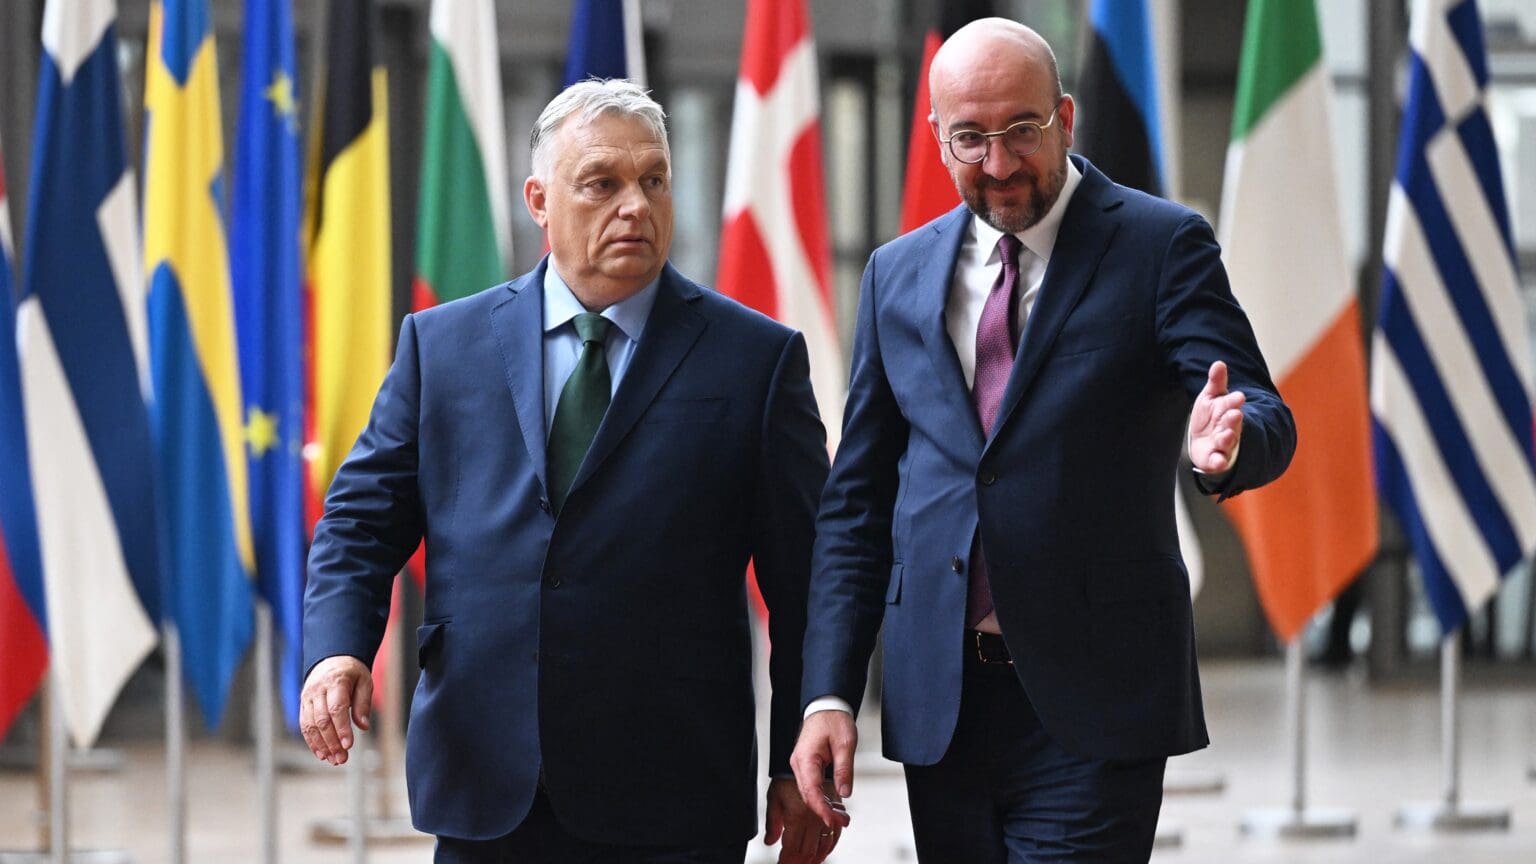 Brussels Fears Hungarian EU Presidency’s Success, Analysis Suggests